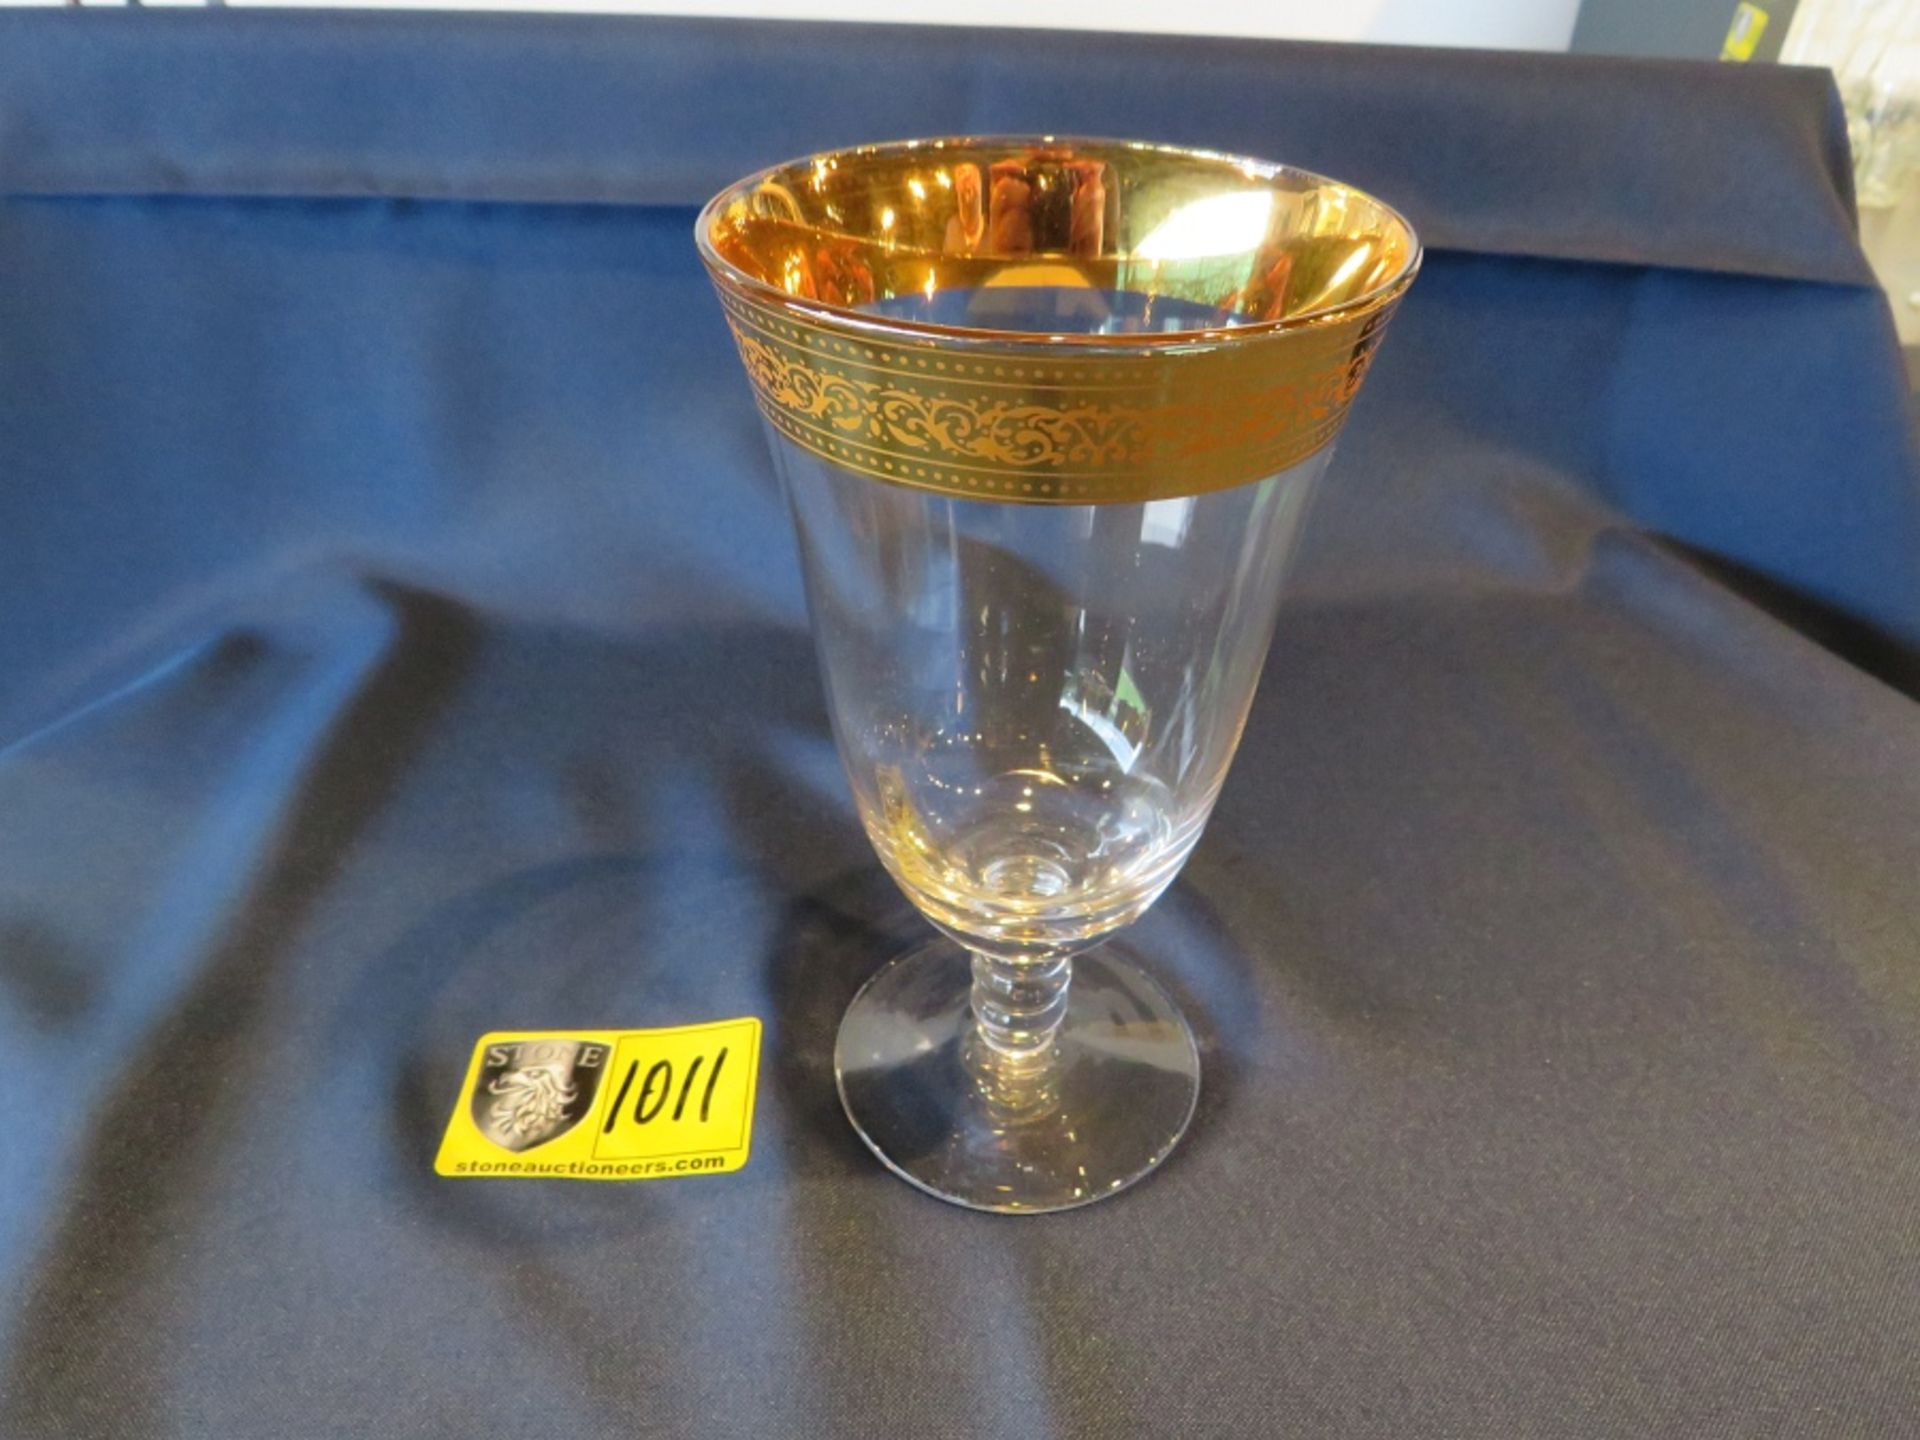 GOLD MAGNIFICENCE WATER GOBLET- IN 12 RACKS- BILLED AT $9 PER RACK